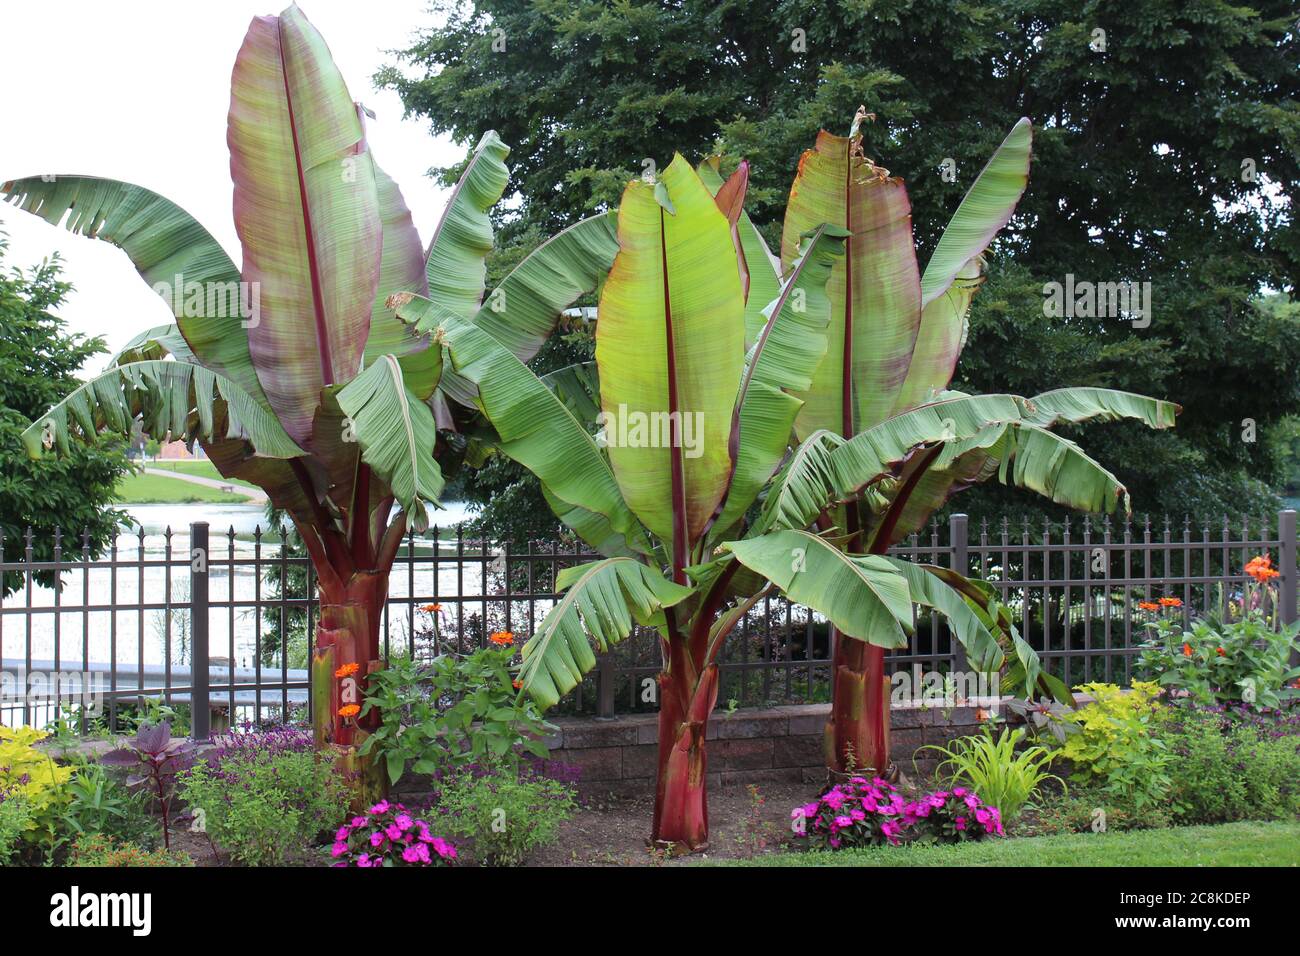 Three Red Leaf Abyssinian Banana Trees, Ensete ventricosum, orange Zinnias, pink Impatiens, and other various flowering plants growing along a fence a Stock Photo